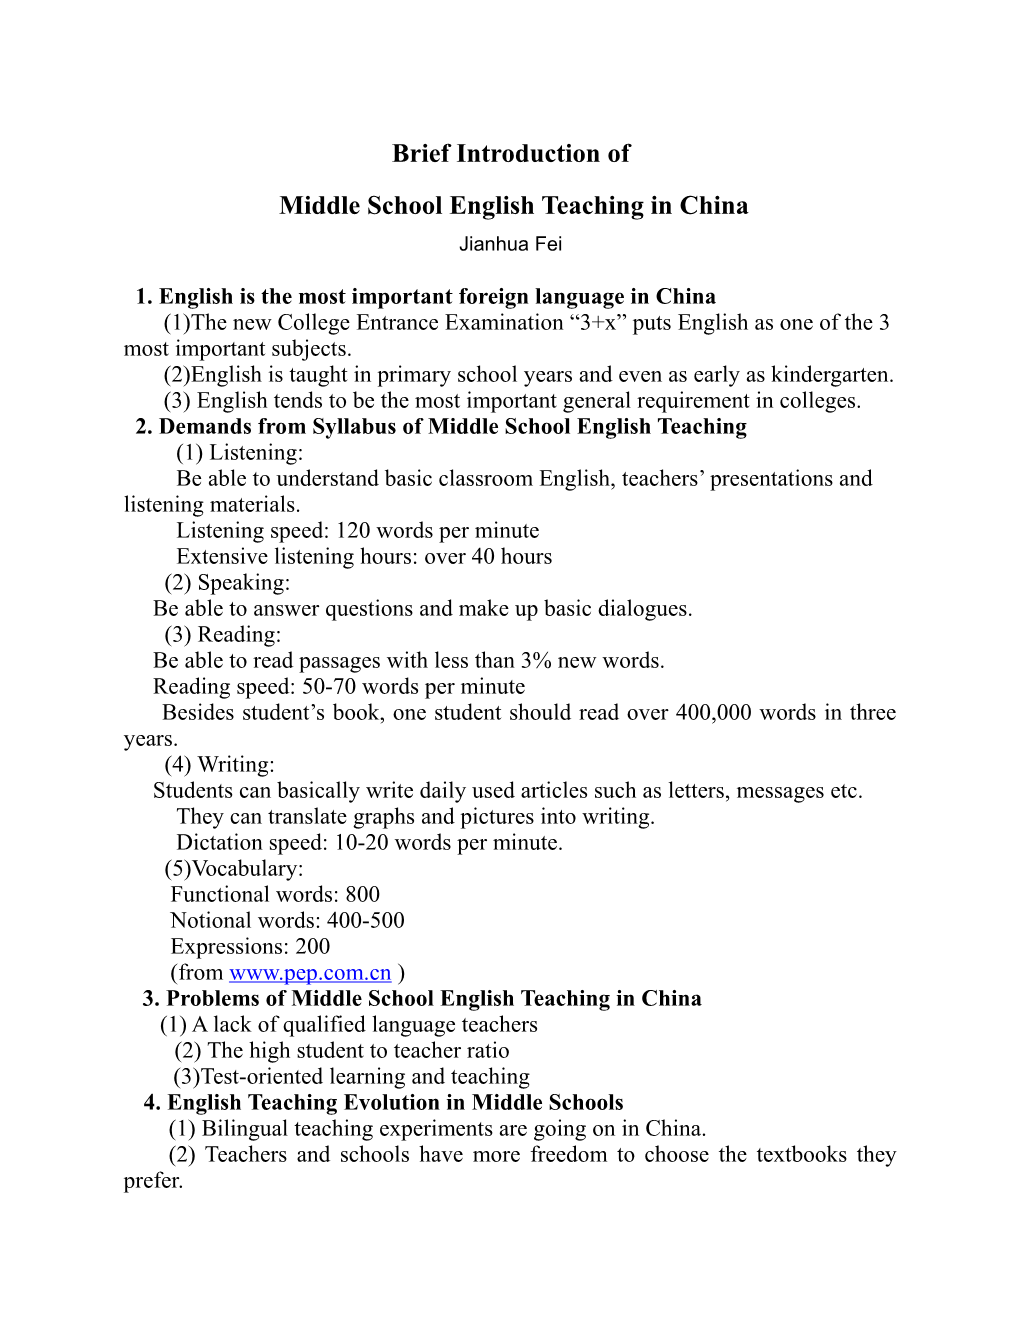 Brief Introduction of English Teaching in Middle Schools in China